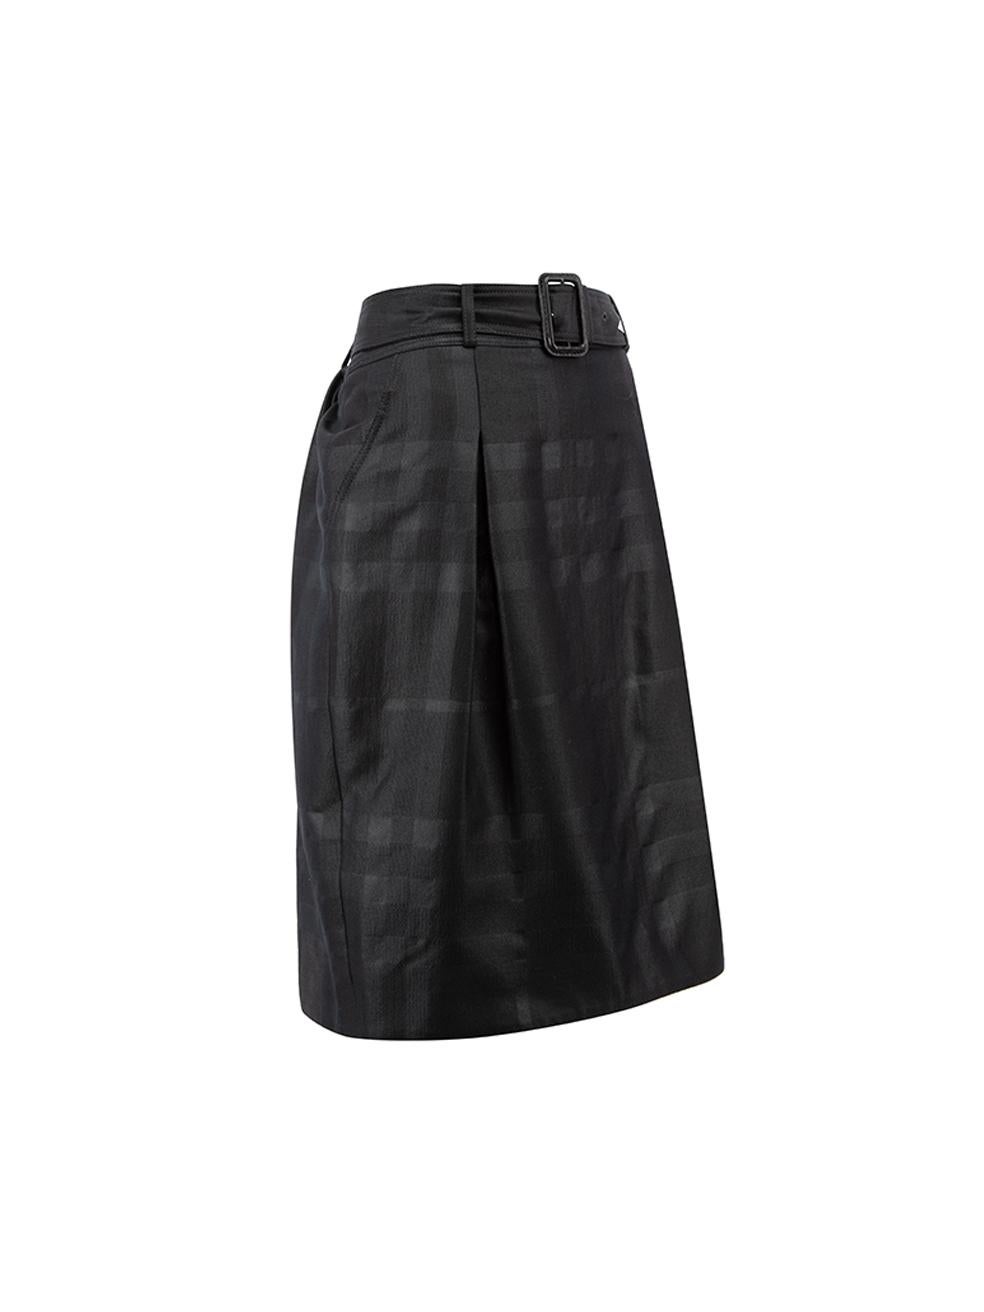 CONDITION is Very good. Hardly any visible wear to skirt is evident on this used Burberry designer resale item.



Details


Black

Wool

Polyester

Fitted

Pencil skirt

Check pattern

Belted

Side zipper fastening





Made in